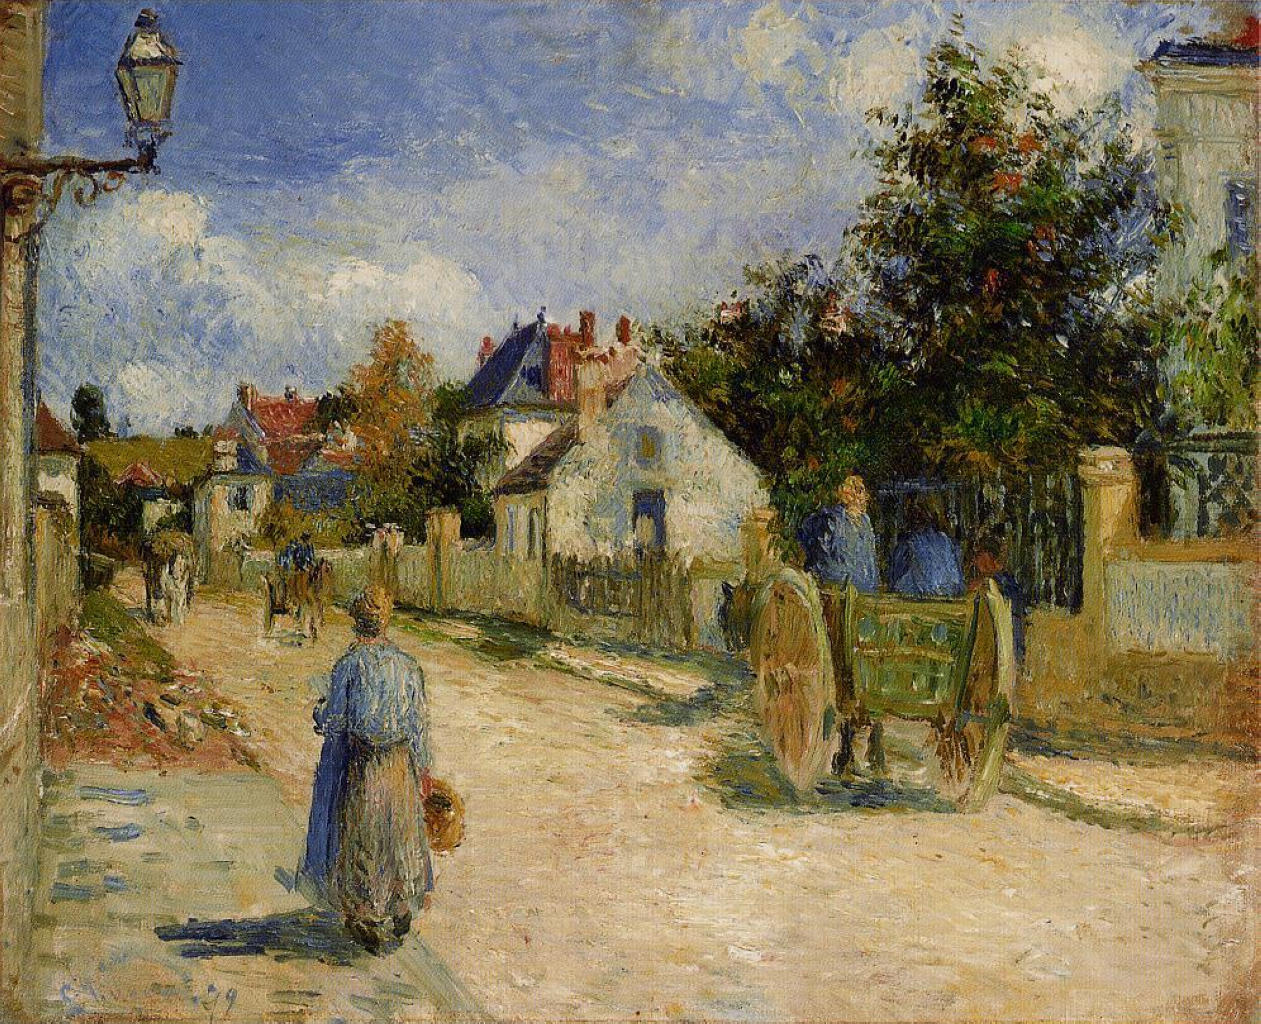 A Street in Pontoise by Camille Pissarro, 1879